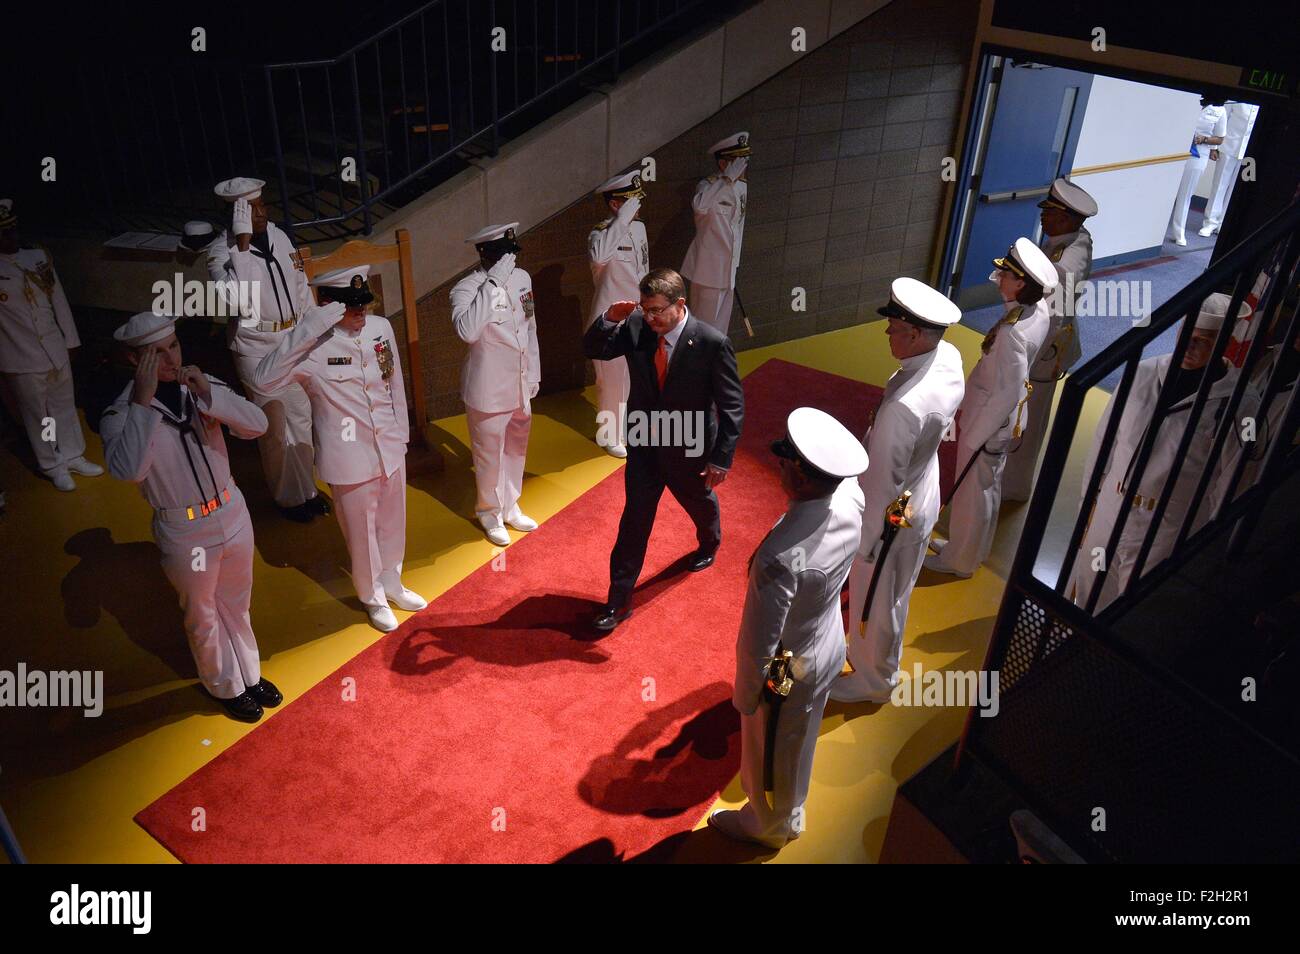 U.S. Defense Secretary Ashton Carter salutes as he walks past sideboys on arrival for a change of command ceremony between Adm. Jonathan Greenert, Chief of Naval Operations, and Adm. John Richardson at the U.S. Naval Academy September 18, 2015 in Annapolis, Maryland. Stock Photo